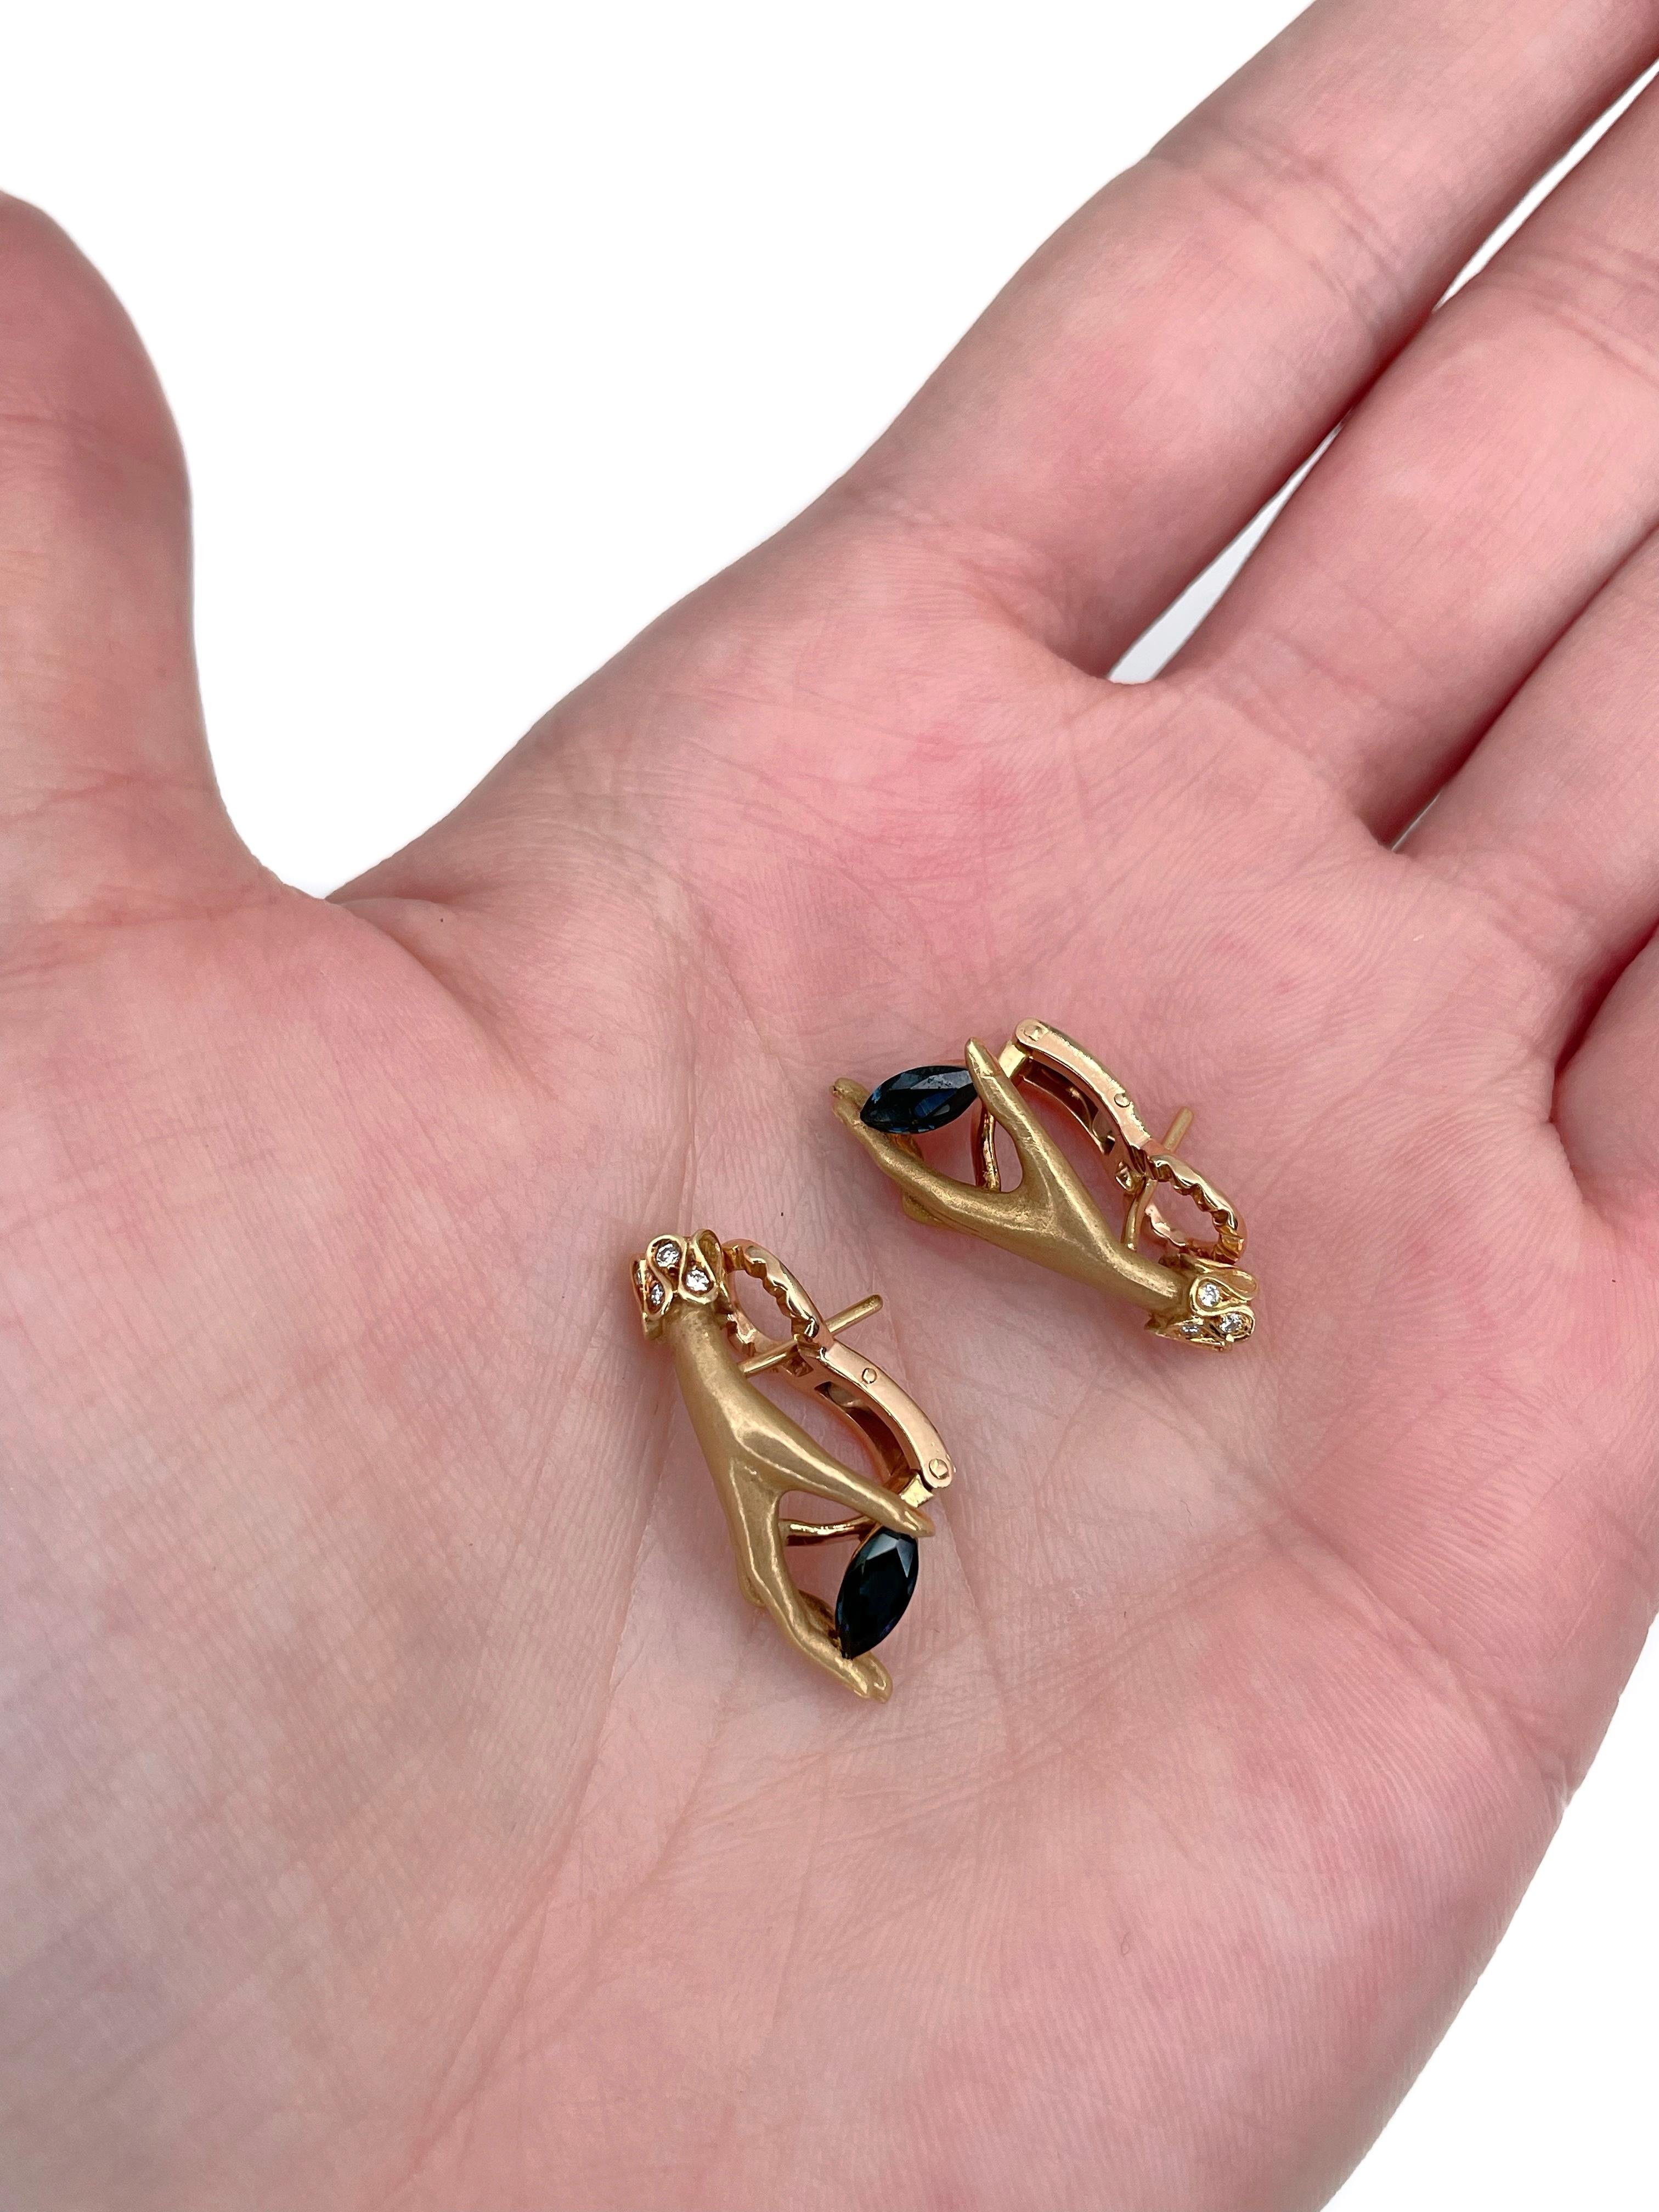 Modern Carrera Y Carrera 18 Karat Gold Hand Holding Sapphire French Back Earrings For Sale